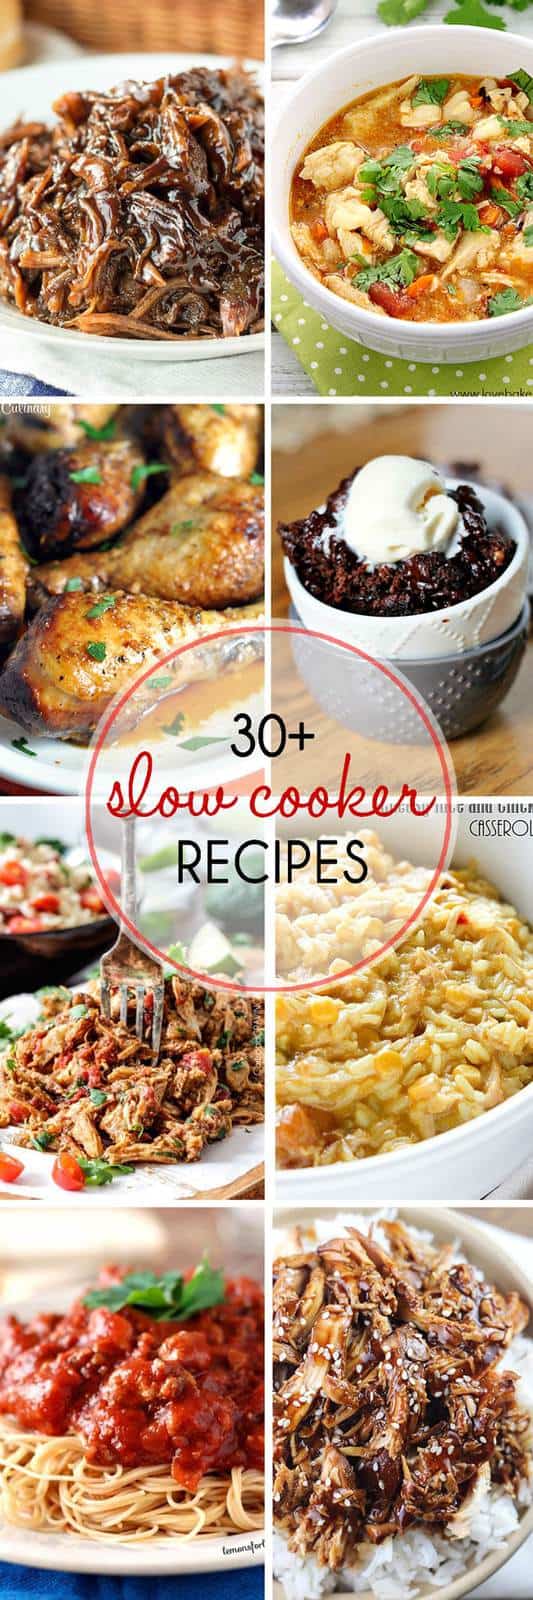 30+ of The Best Slow Cooker Recipes - from soups and side dishes to dinners and desserts, you'll find the best crock pot recipes in this collection! | cupcakesandkalechips.com